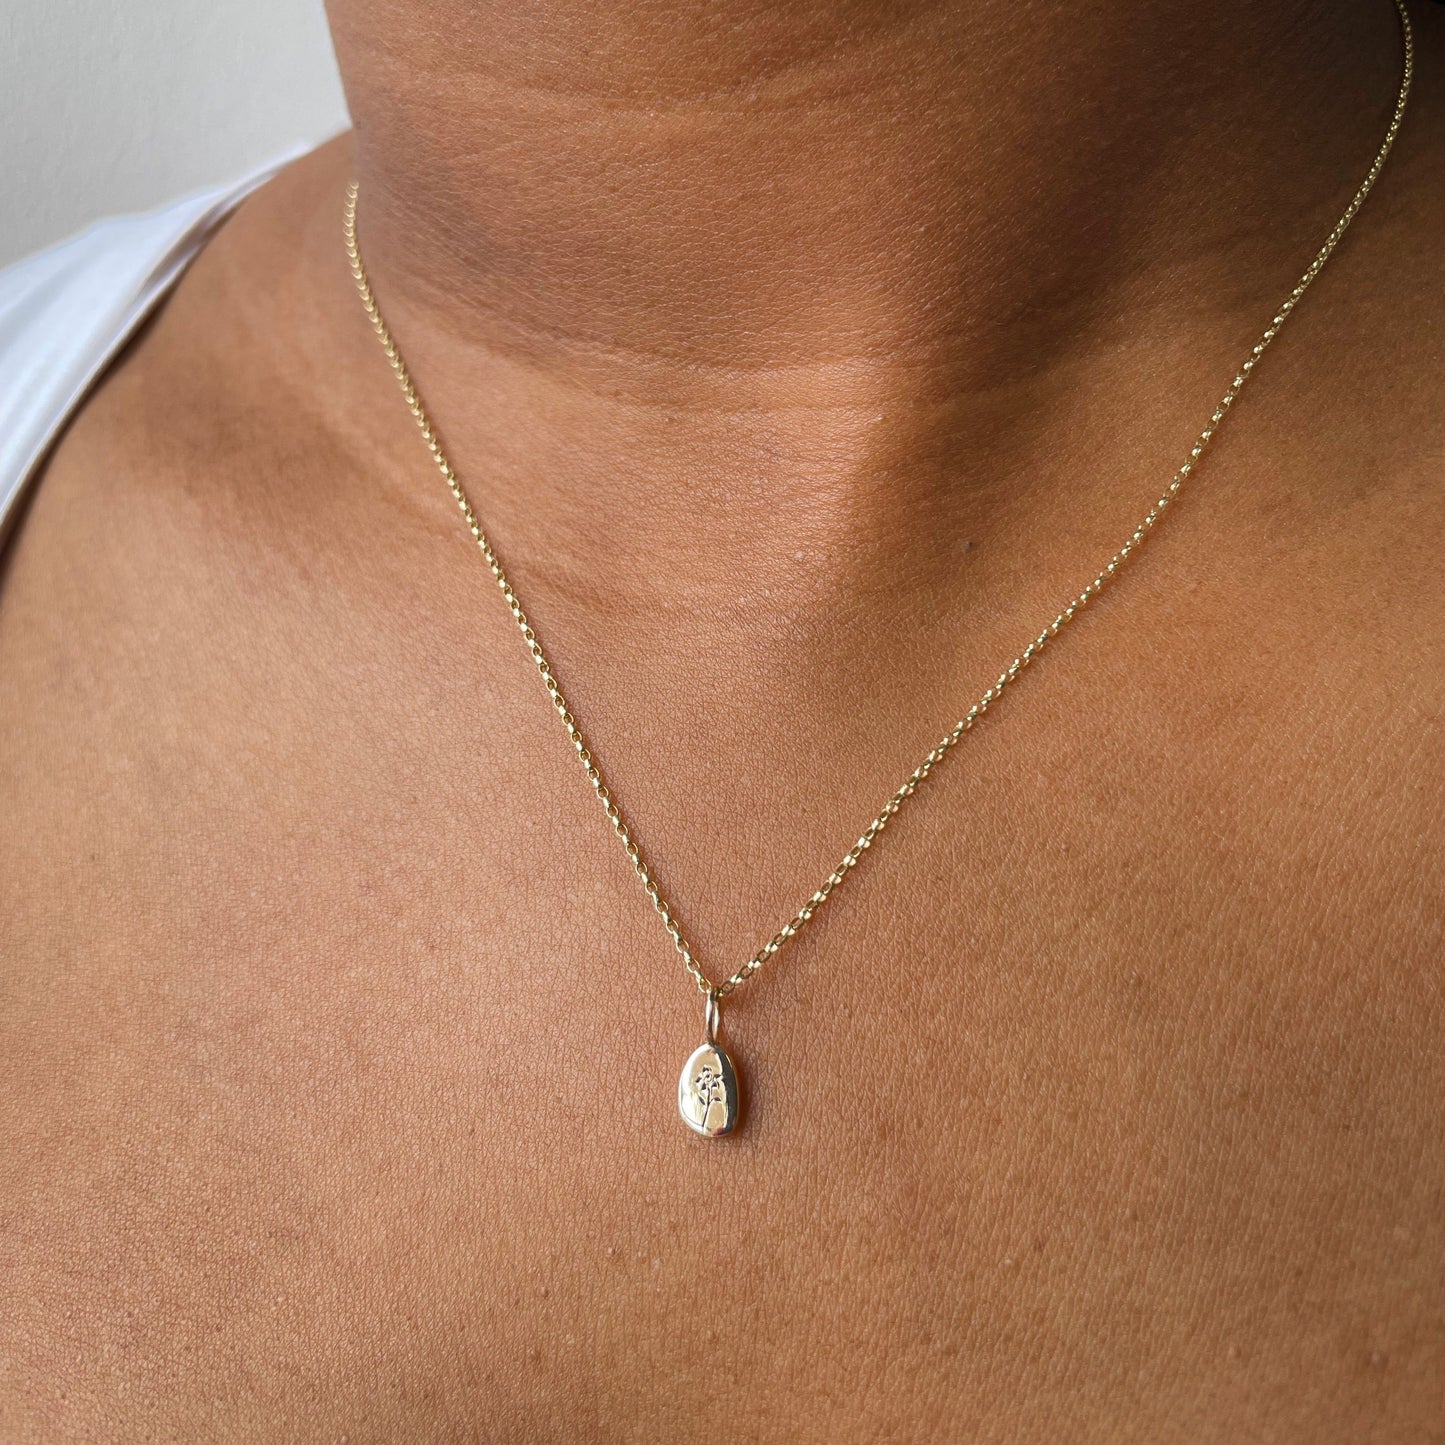 9k solid yellow gold tiny birth flower pebble necklace pendant